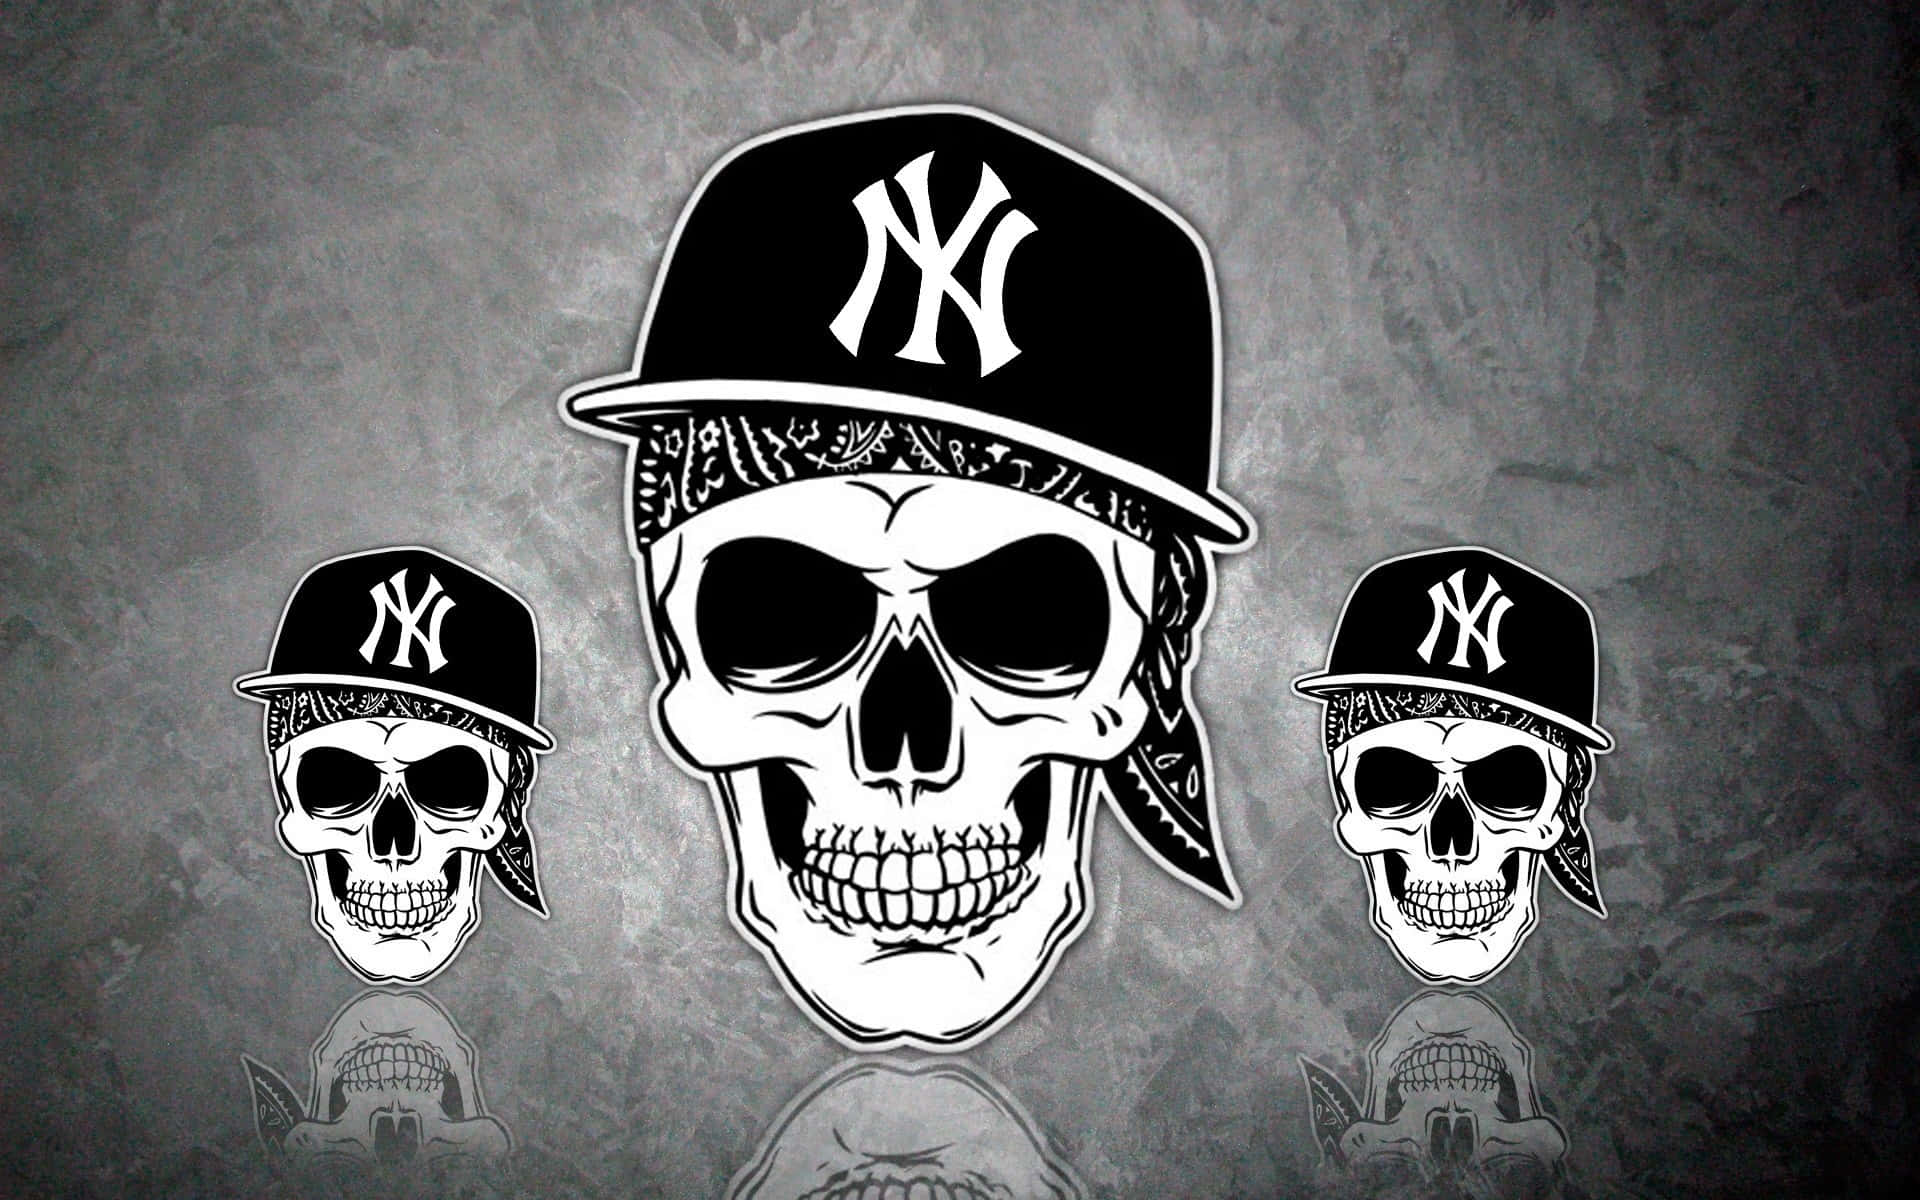 Get your groove on with this fun hip hop background